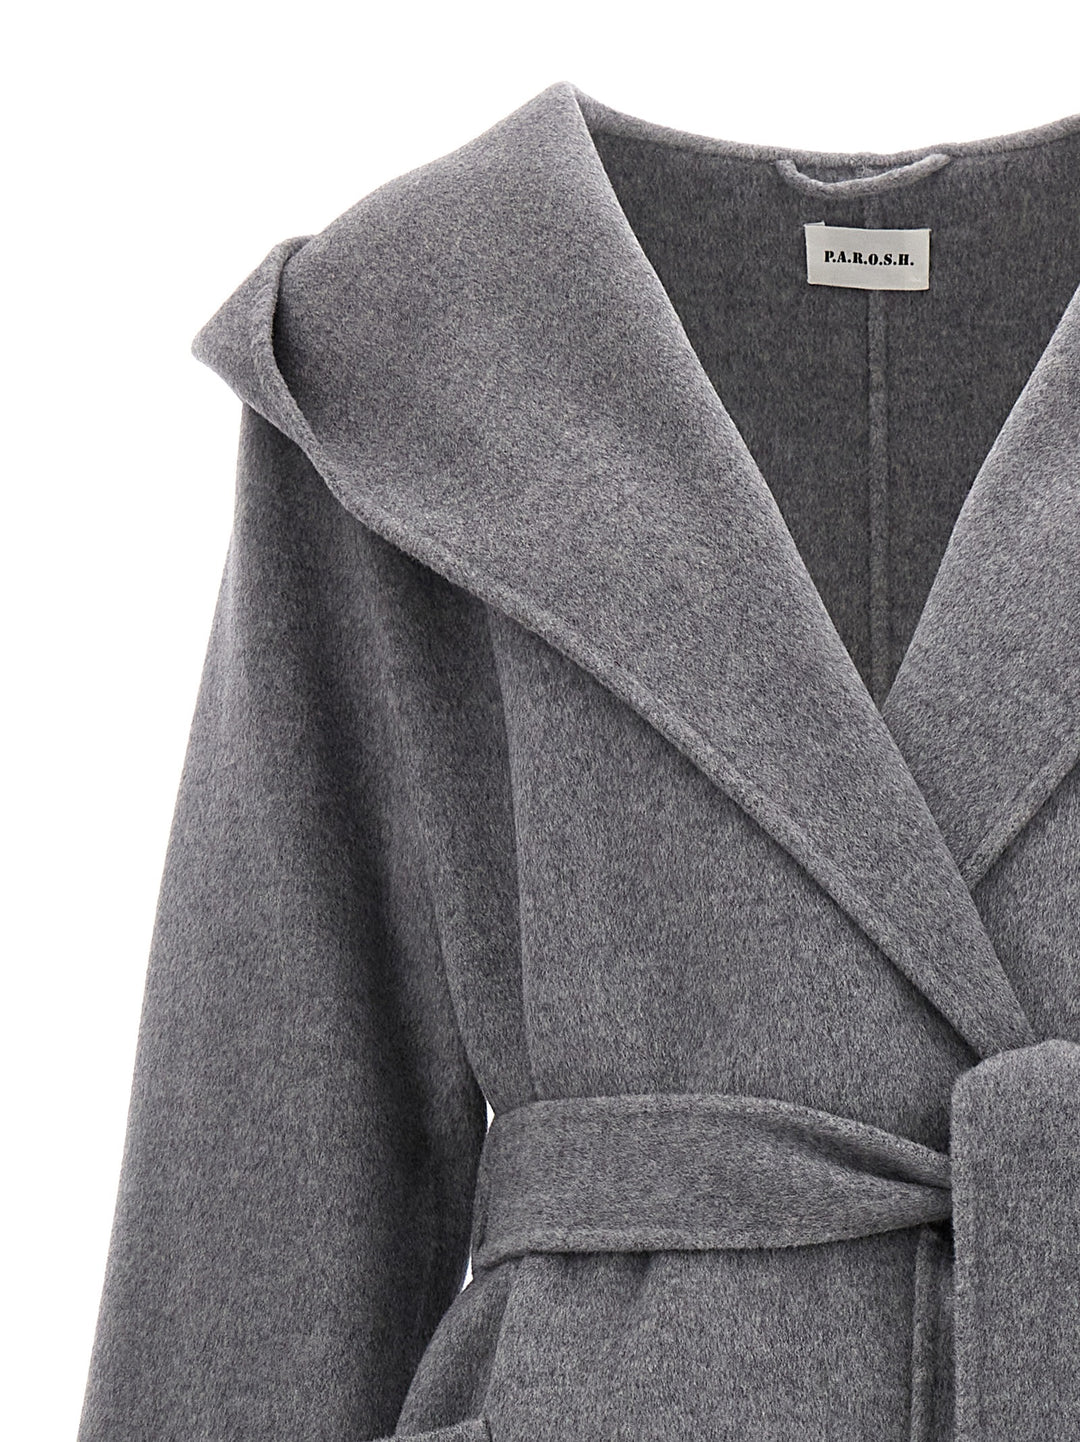 Long Belted Coat Trench E Impermeabili Grigio